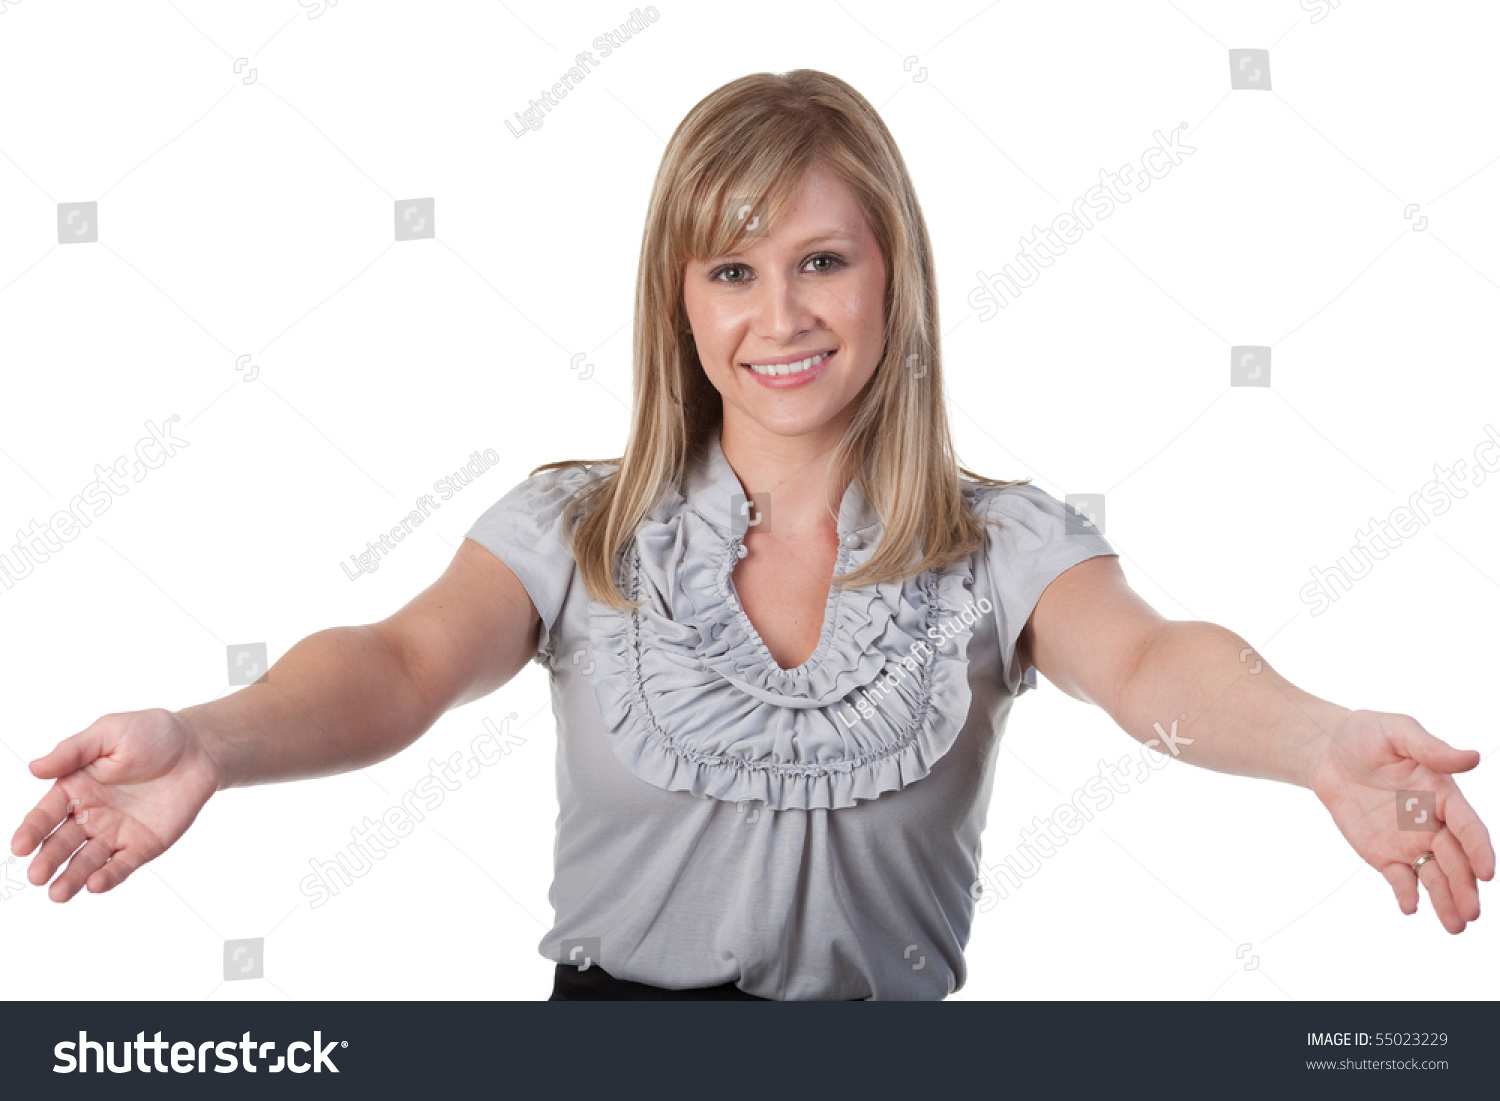 Young Woman Arms Outstretched Welcoming Pose Stock Photo Edit Now 55023229